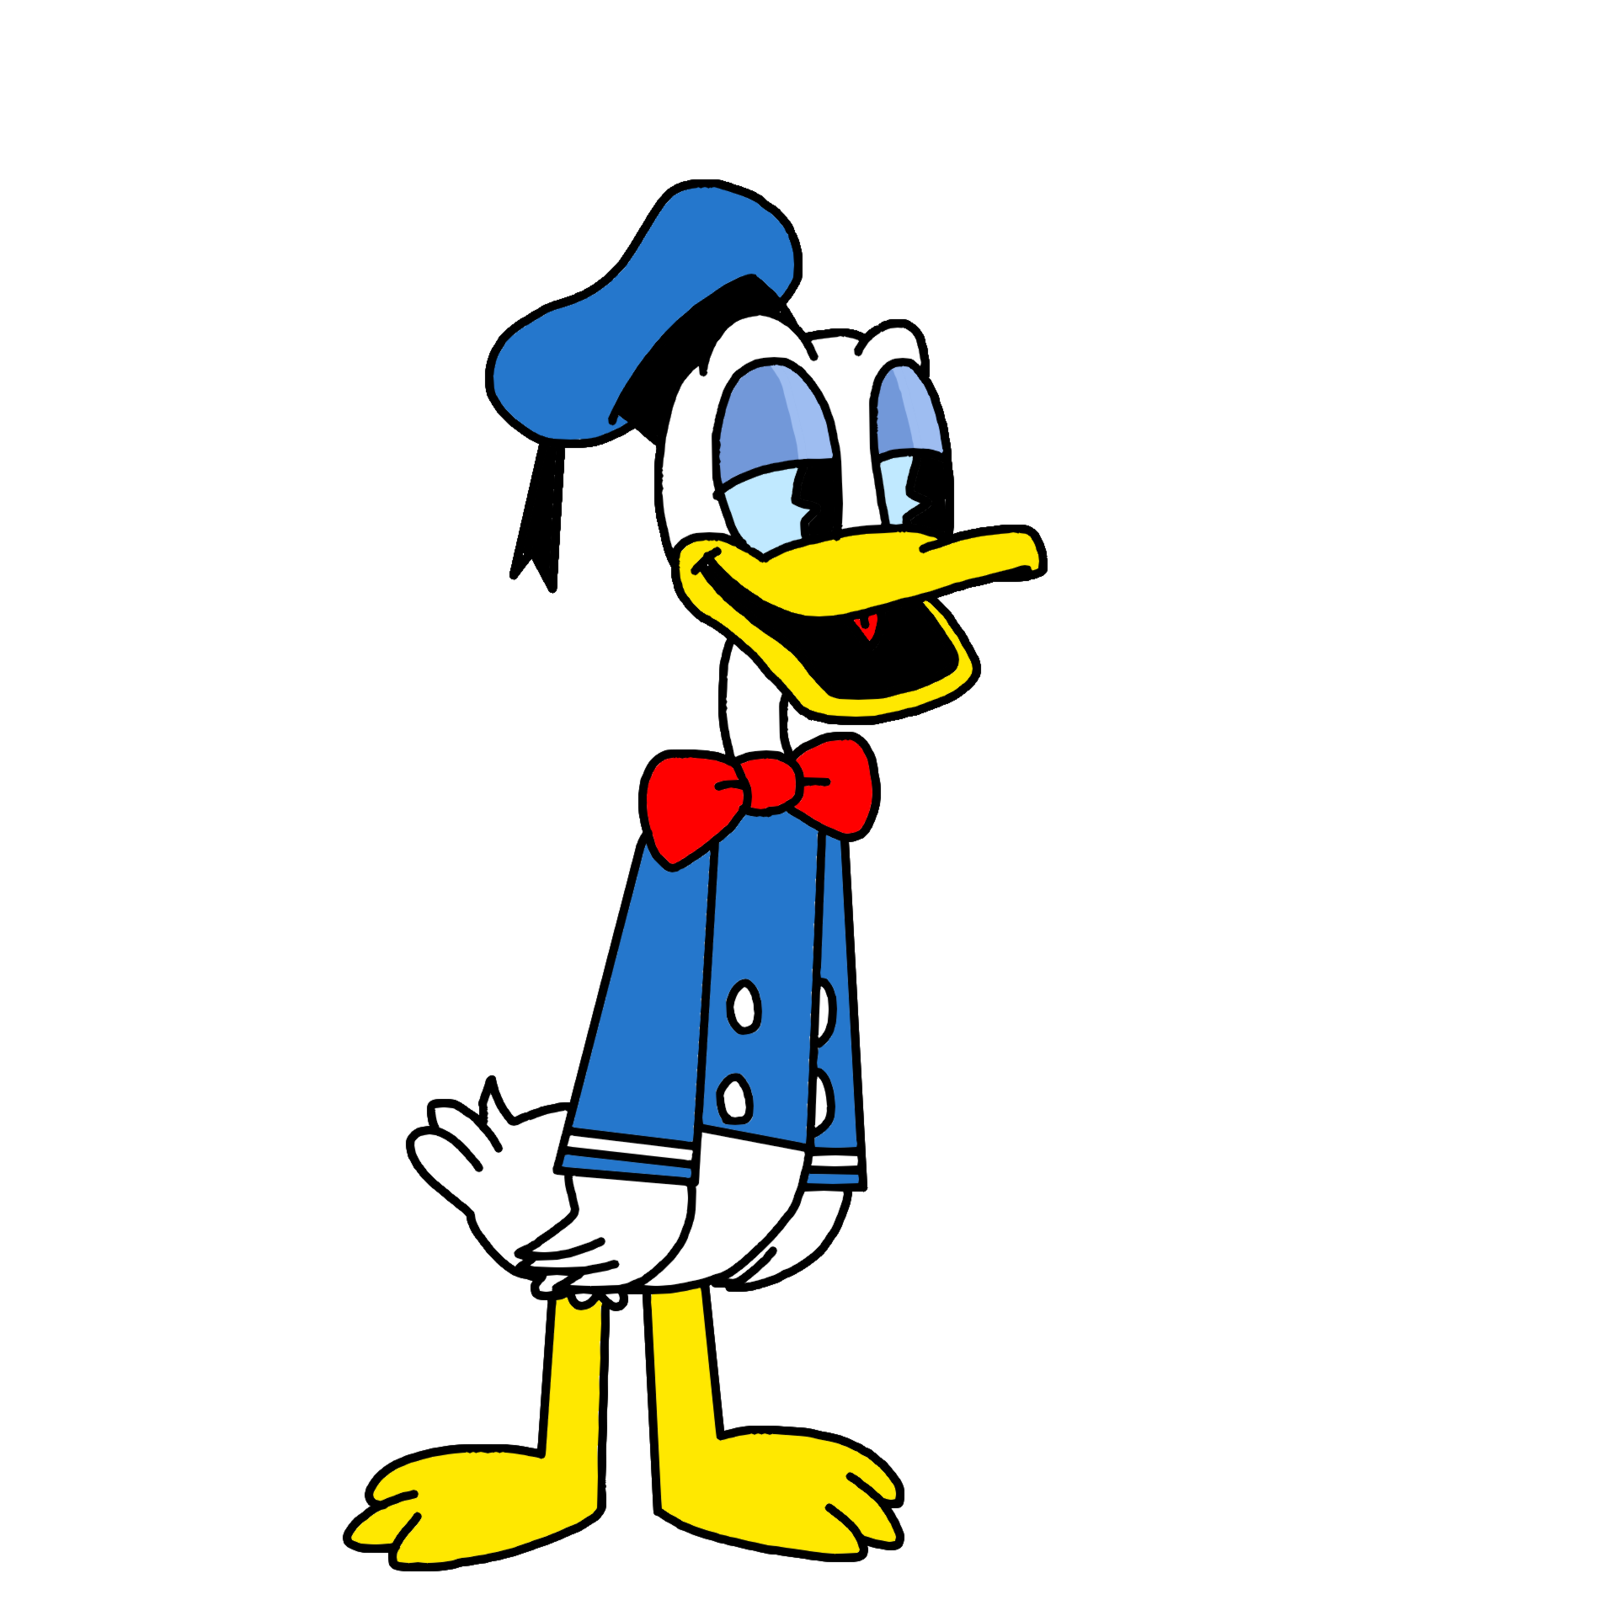 Feet clipart donald duck. Png images free download